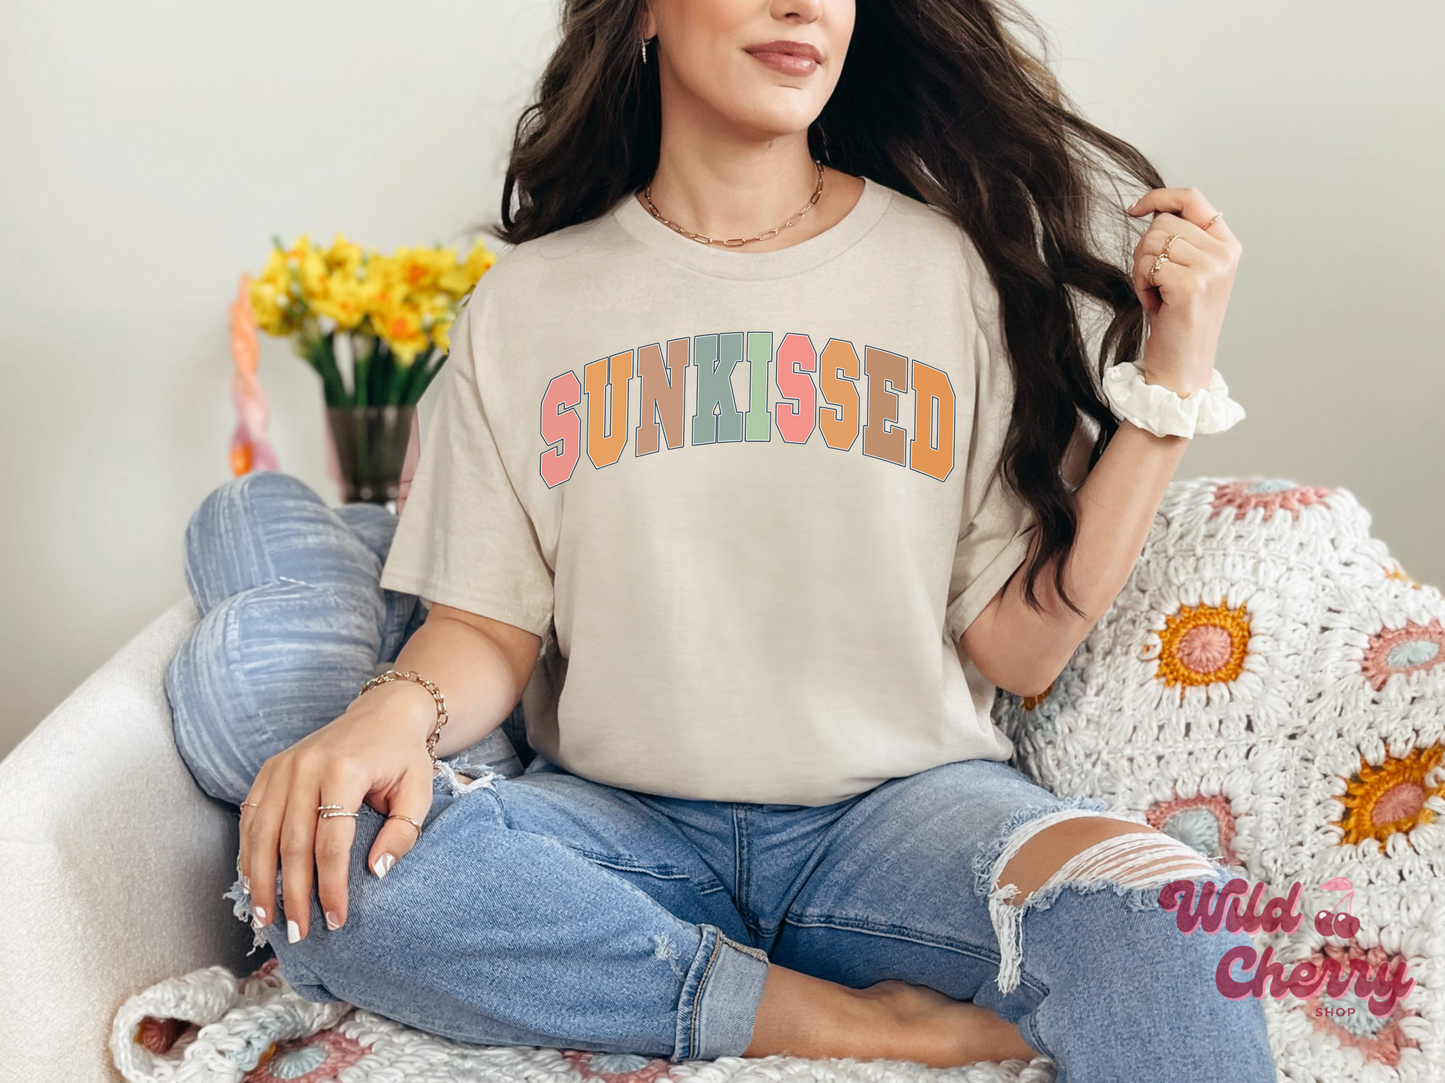 Sunkissed T-Shirt